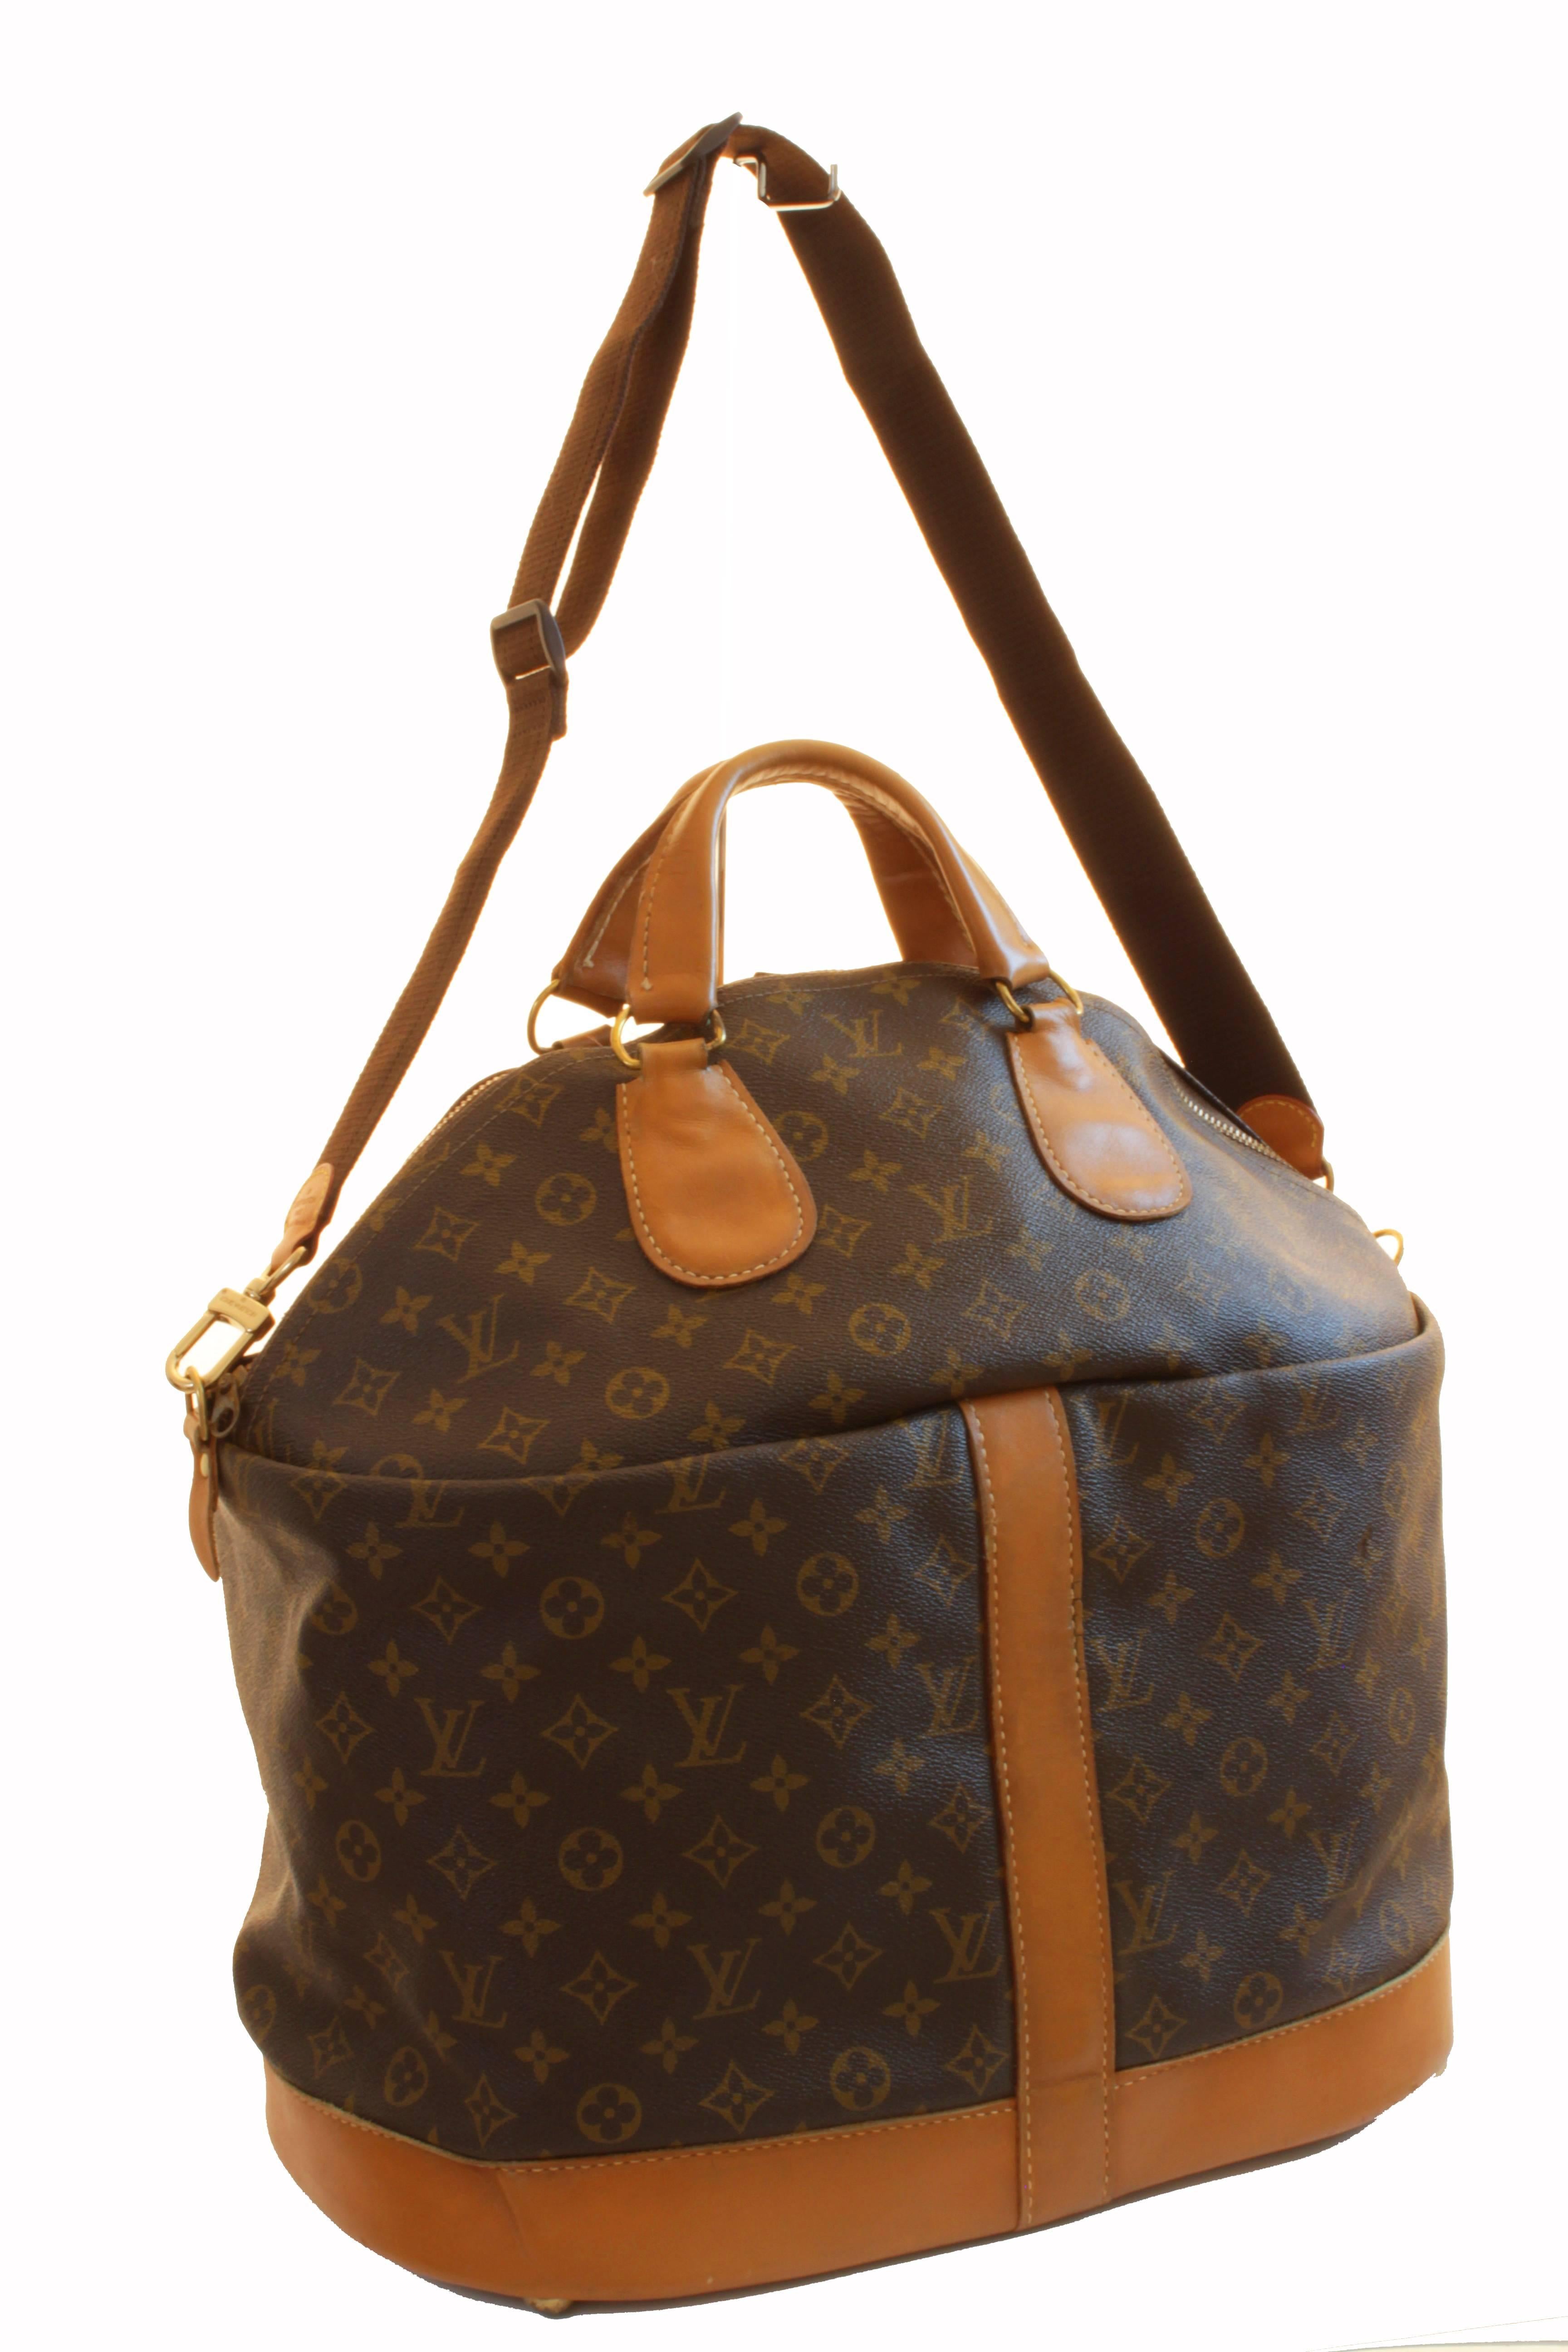 This large and very rare travel bag was originally sold by Saks 5th Ave and made under special license by The French Company for Louis Vuitton, long before LV had a boutique presence in the USA. Produced for only a short period, these incredible